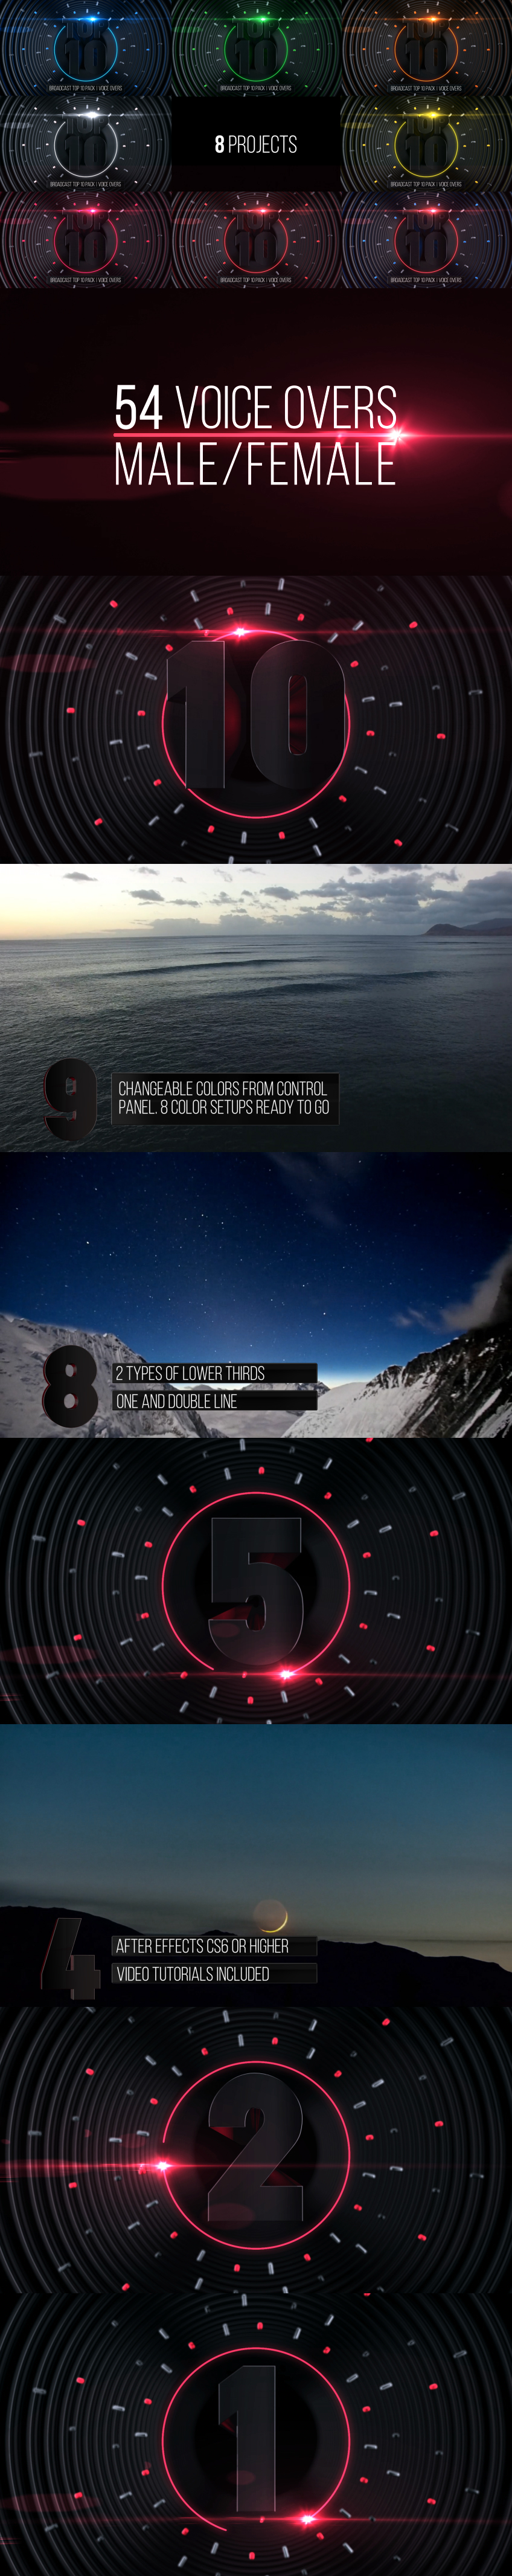 Awards broadcast bumper Charts countdown Event intro Lower Third after effects templates